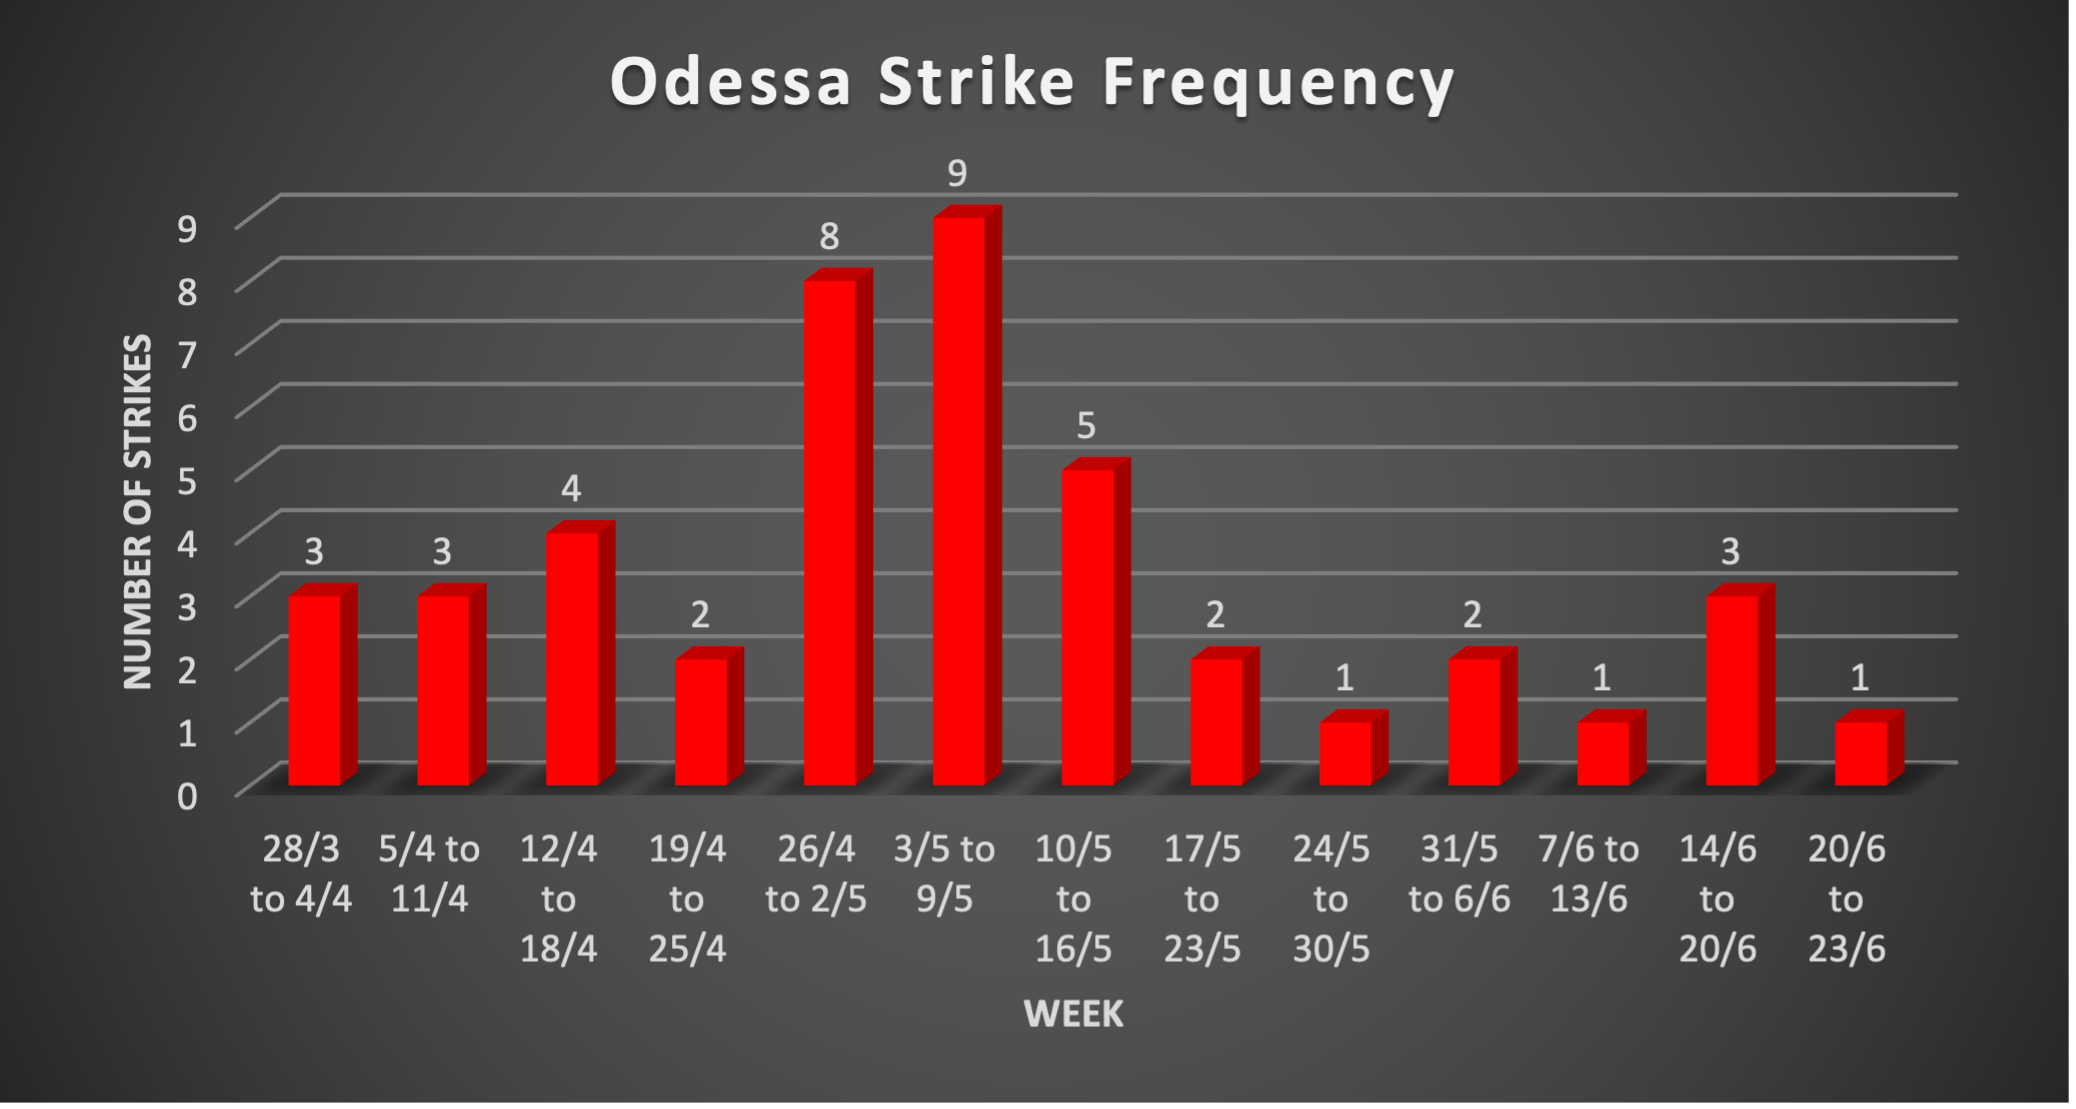 Figure 1. Table showing frequency of strikes on Odessa 